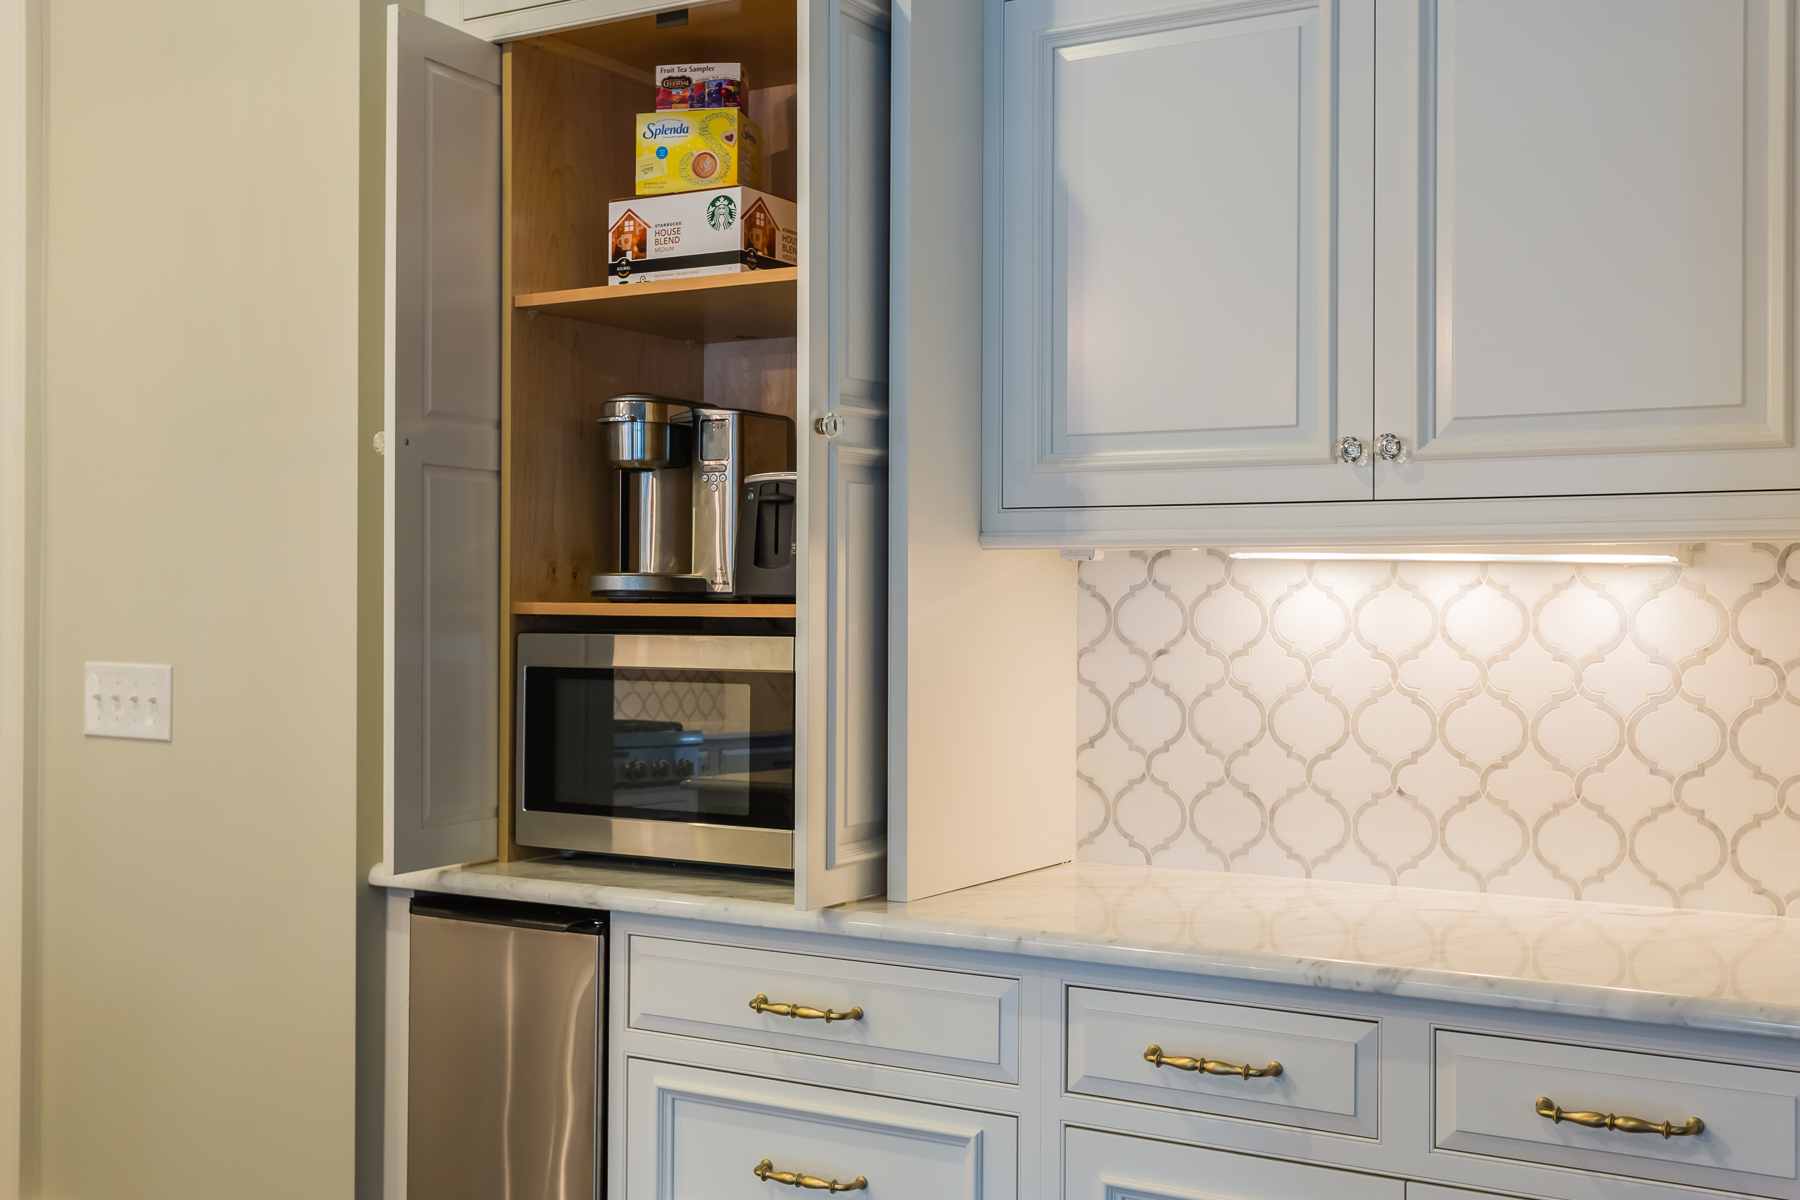 Custom Pull Out Tray Storage - Crystal Cabinets